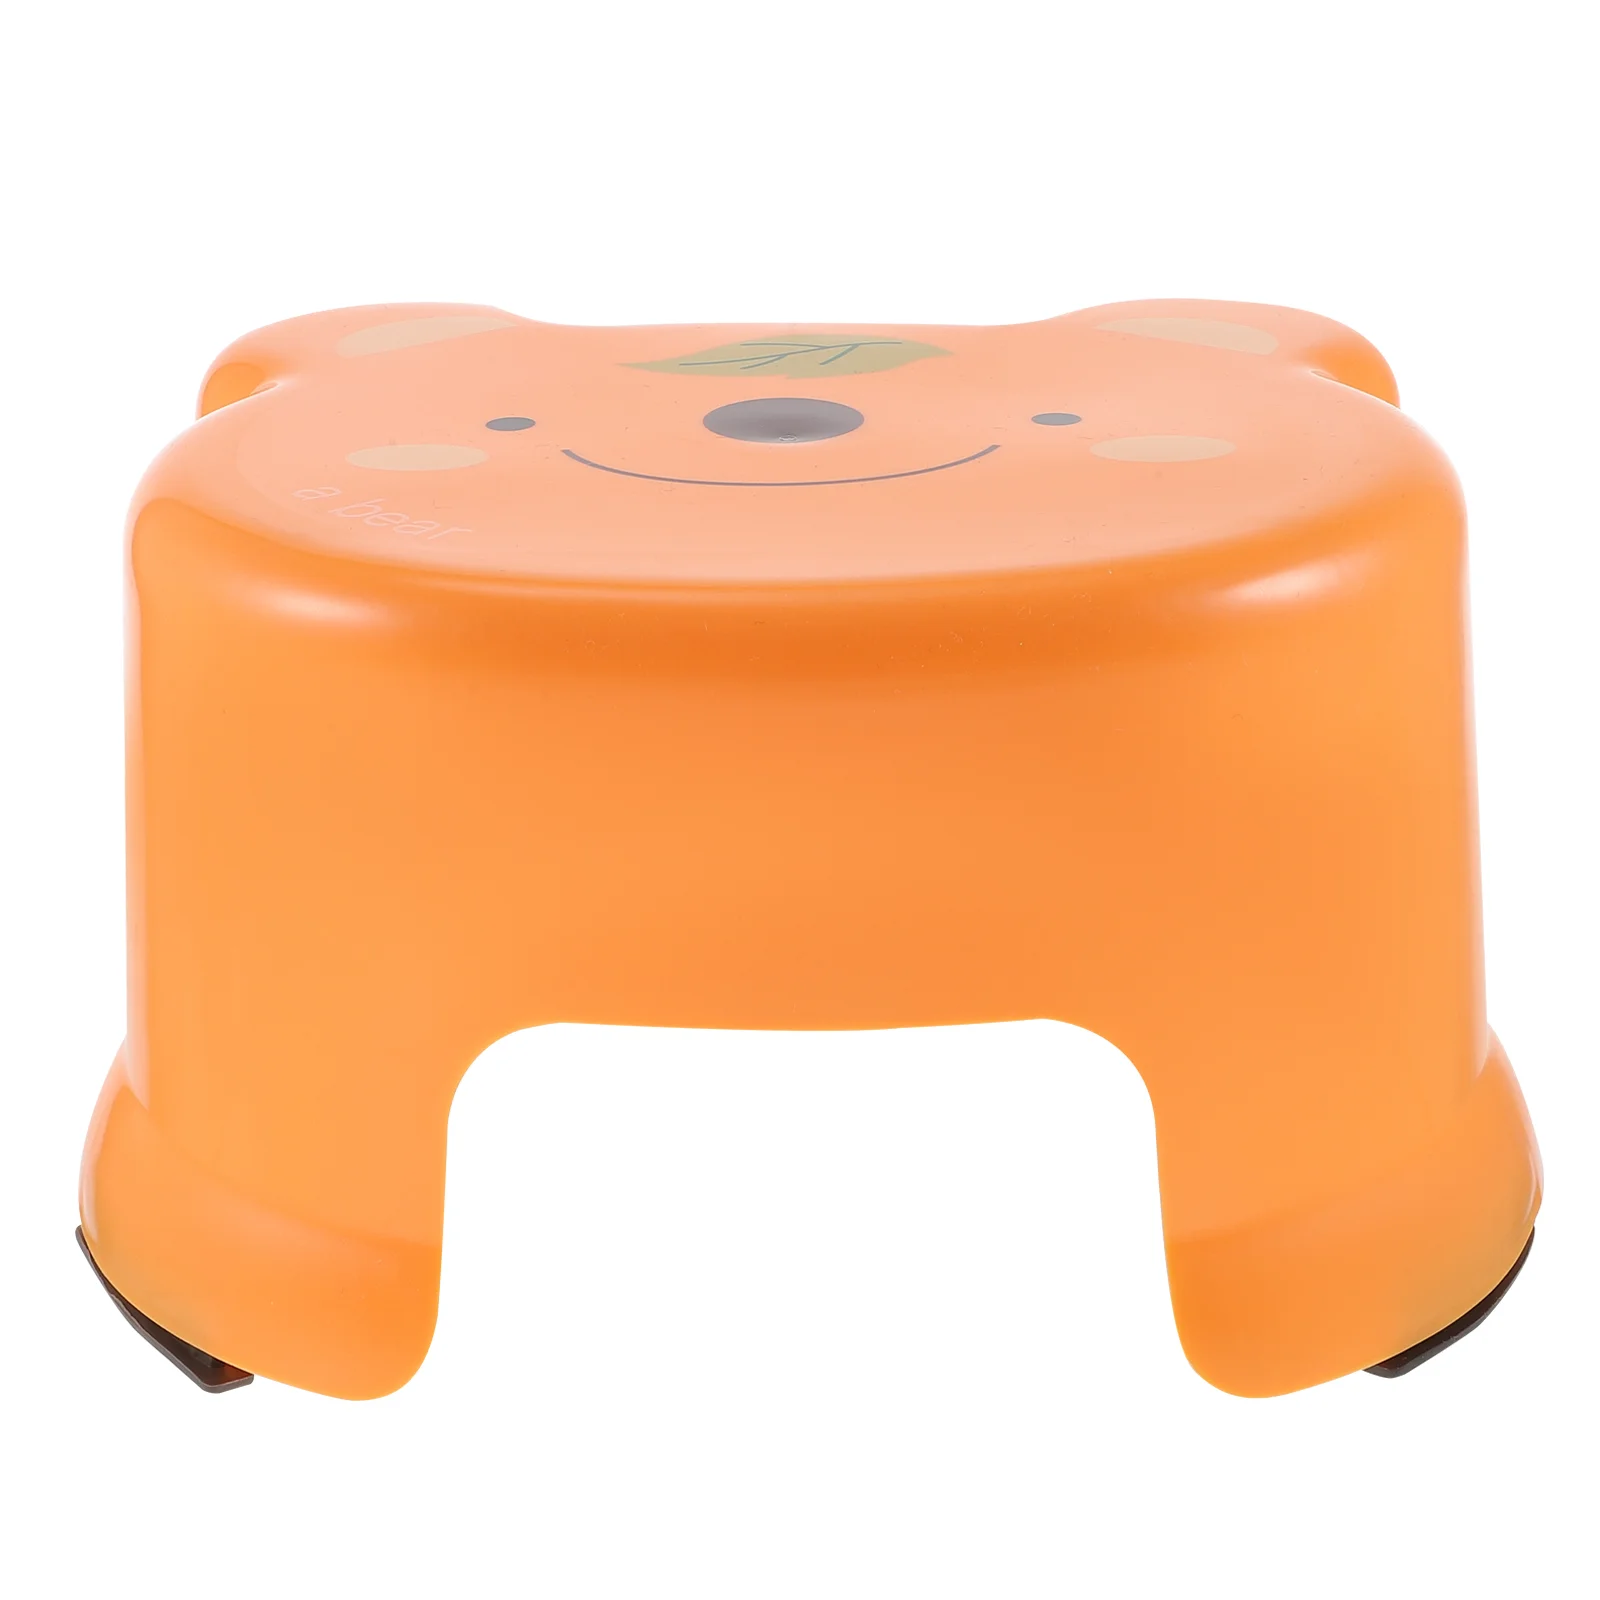 

Stool Step Bathroom Toilet Kids Stools Toddler Foot Kitchen Training Potty Safety Helper Adults Steps Toddlers Poop Stepping